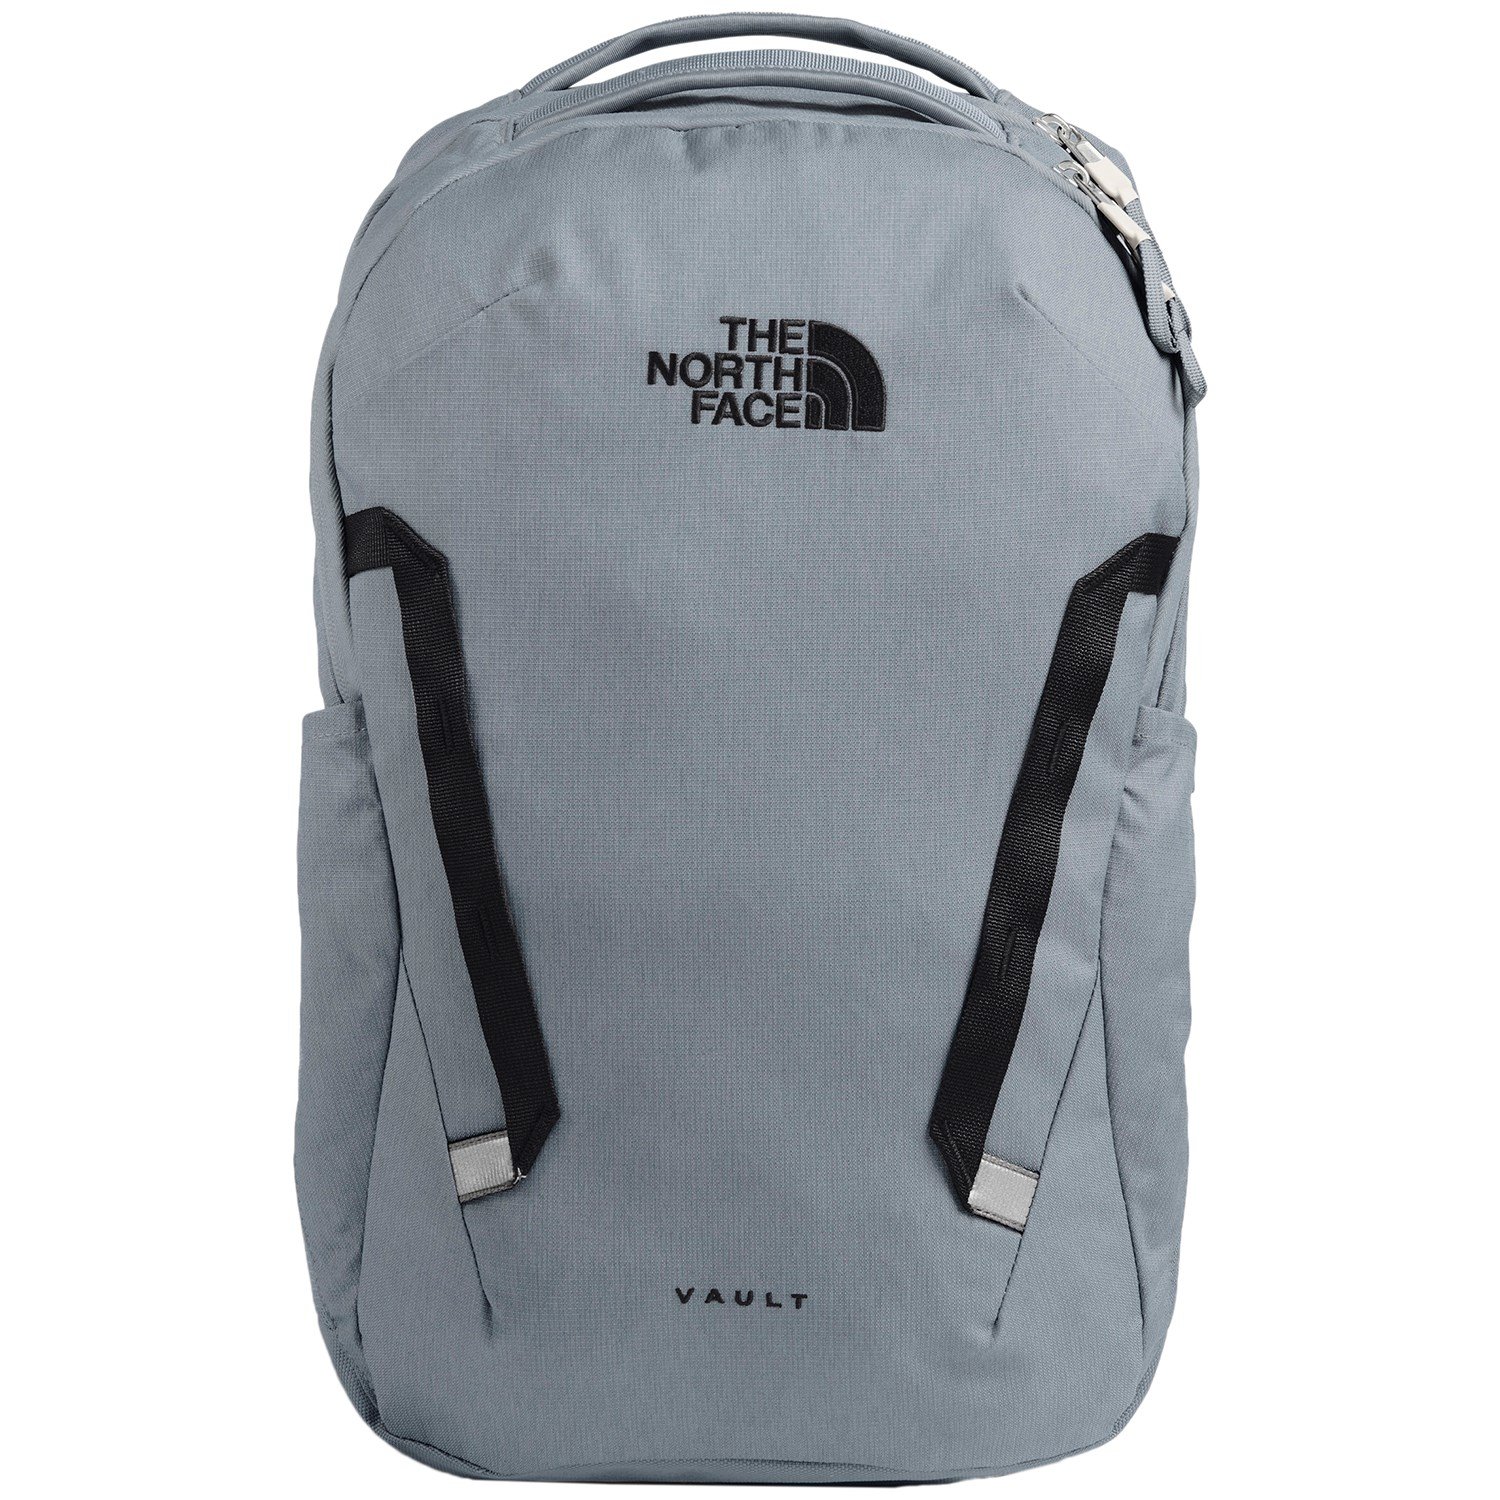 north face vault backpack review